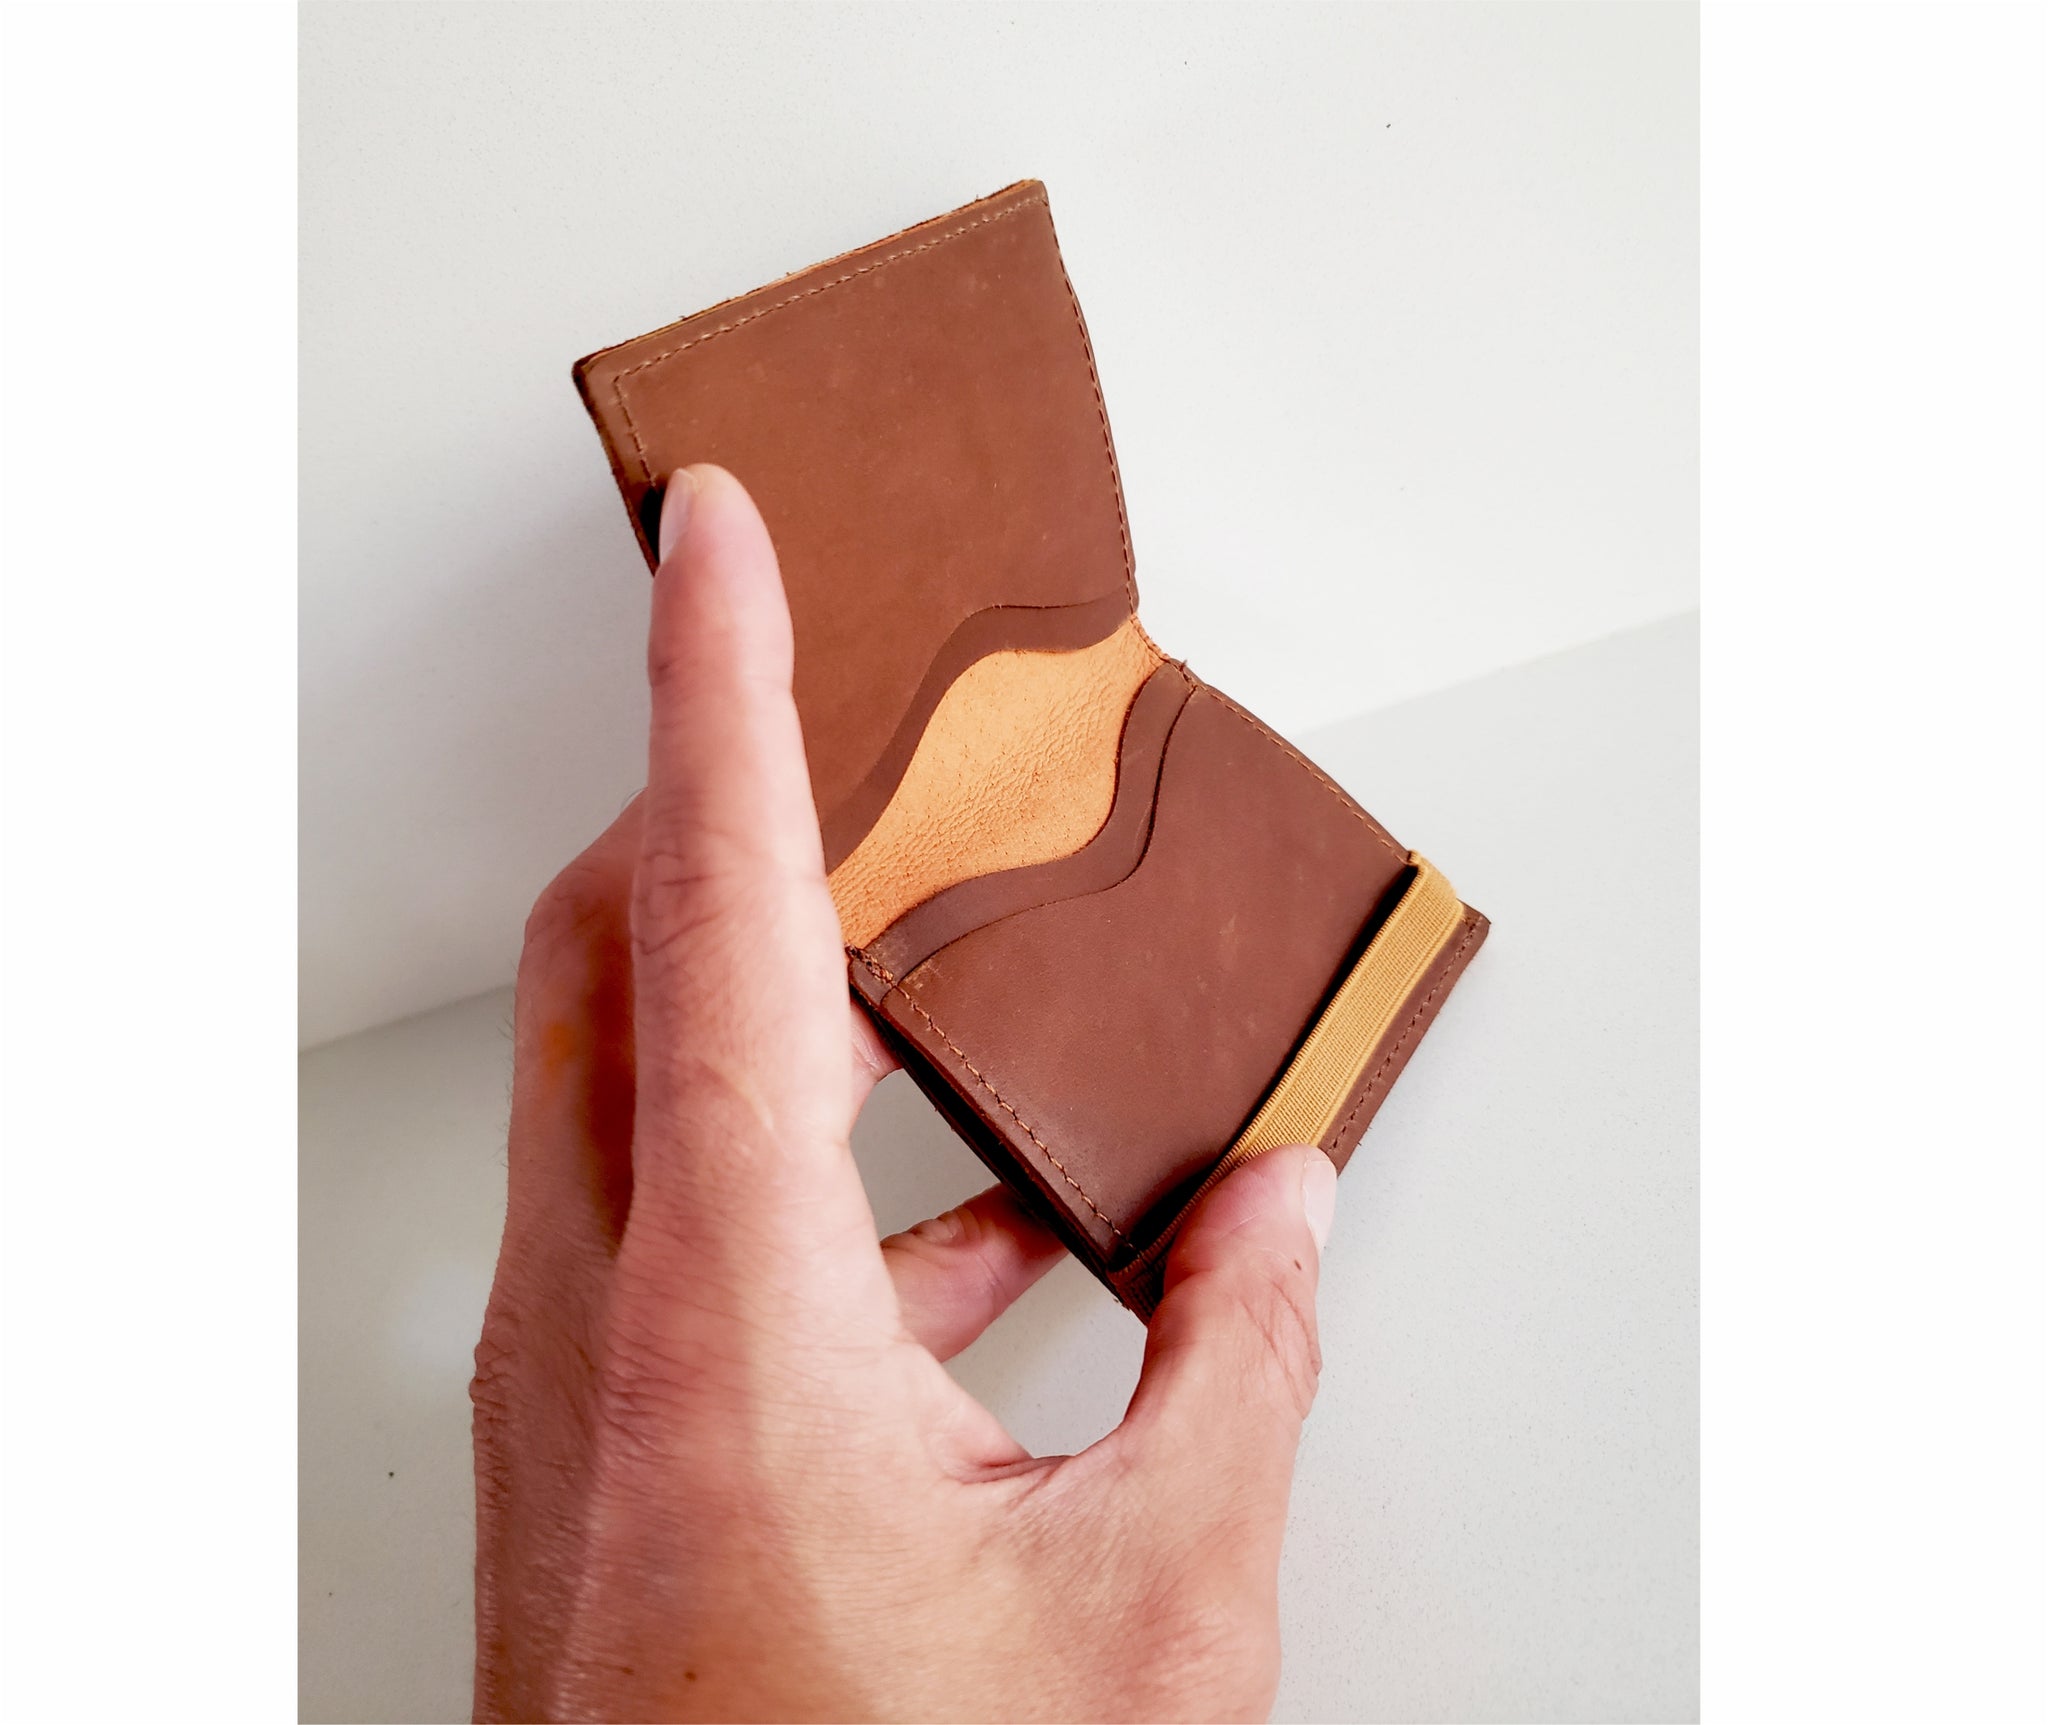 Brown Handmade Italian leather bifold wallet. The perfect lightweight slim wallet to fit seamlessly in your pocket. This cards wallet features a coin pocket, and secure rubber band & metal clip for bills.